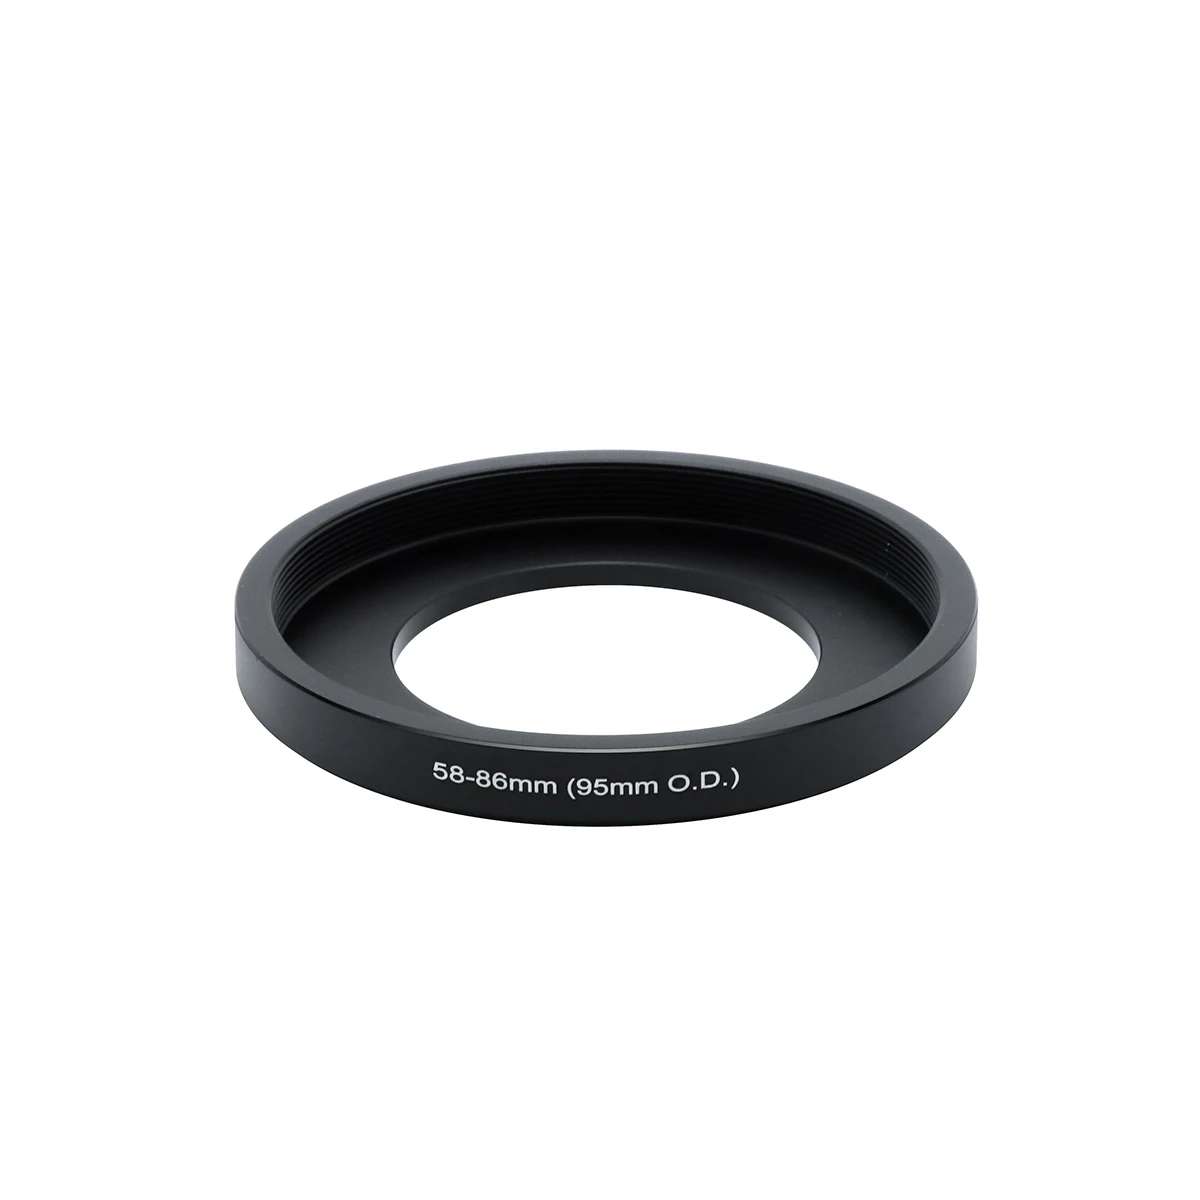 48-86mm 60-86mm (95mm O.D.) Matte Box Filter Adapter Step Up Front Ring